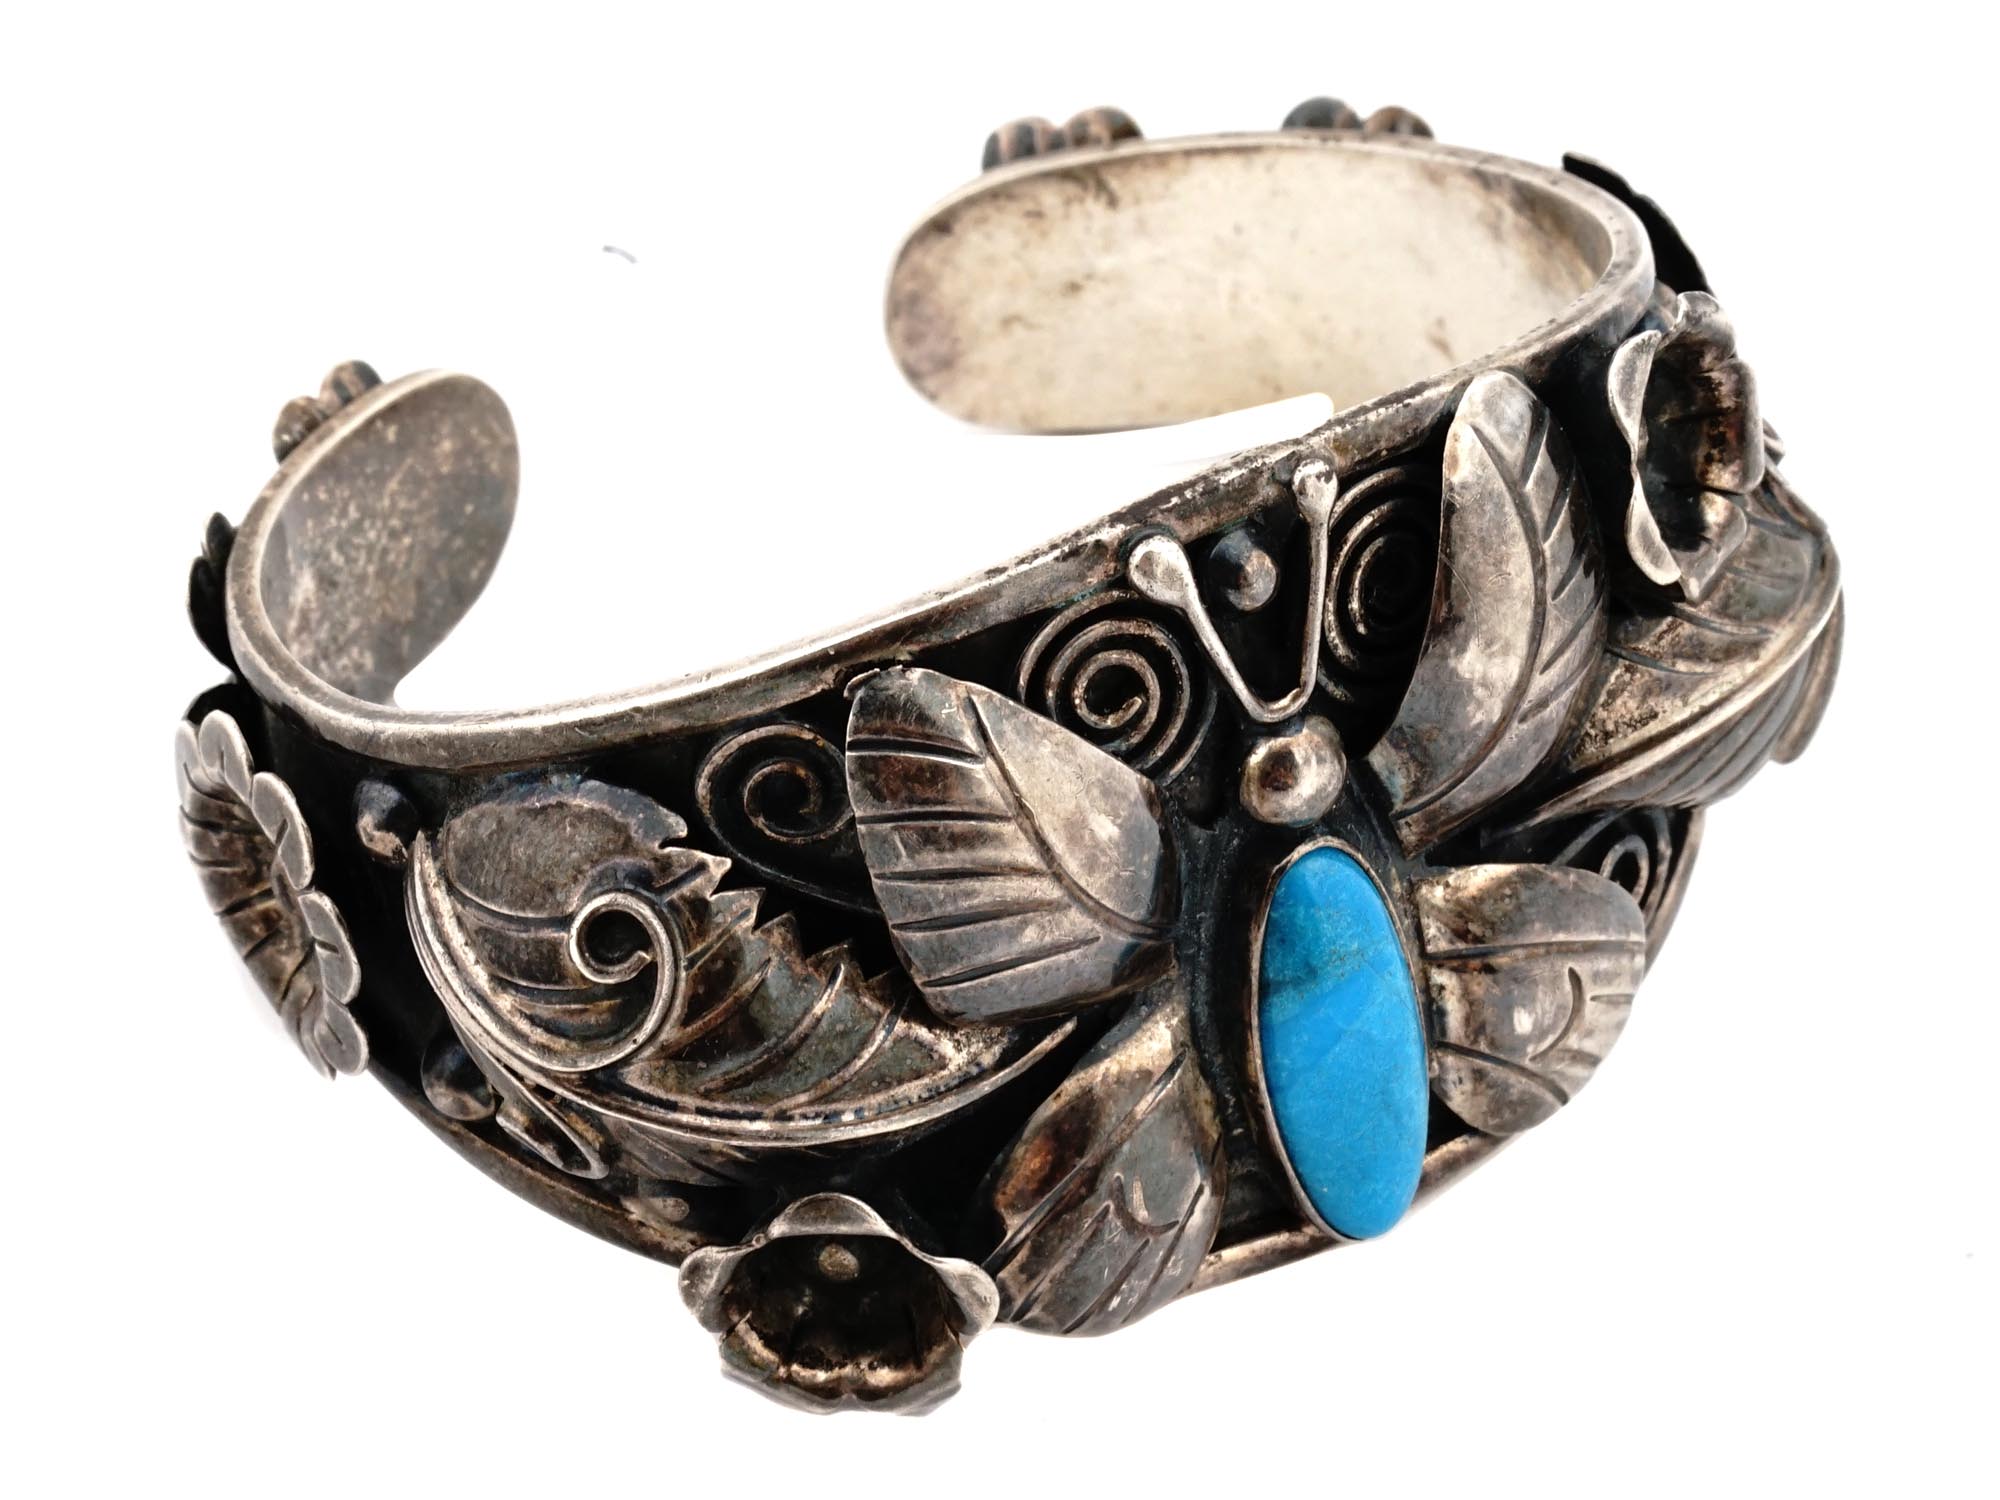 VTG AMERICAN NAVAJO STYLE SILVER TURQUOISE CUFF BANGLE PIC-0